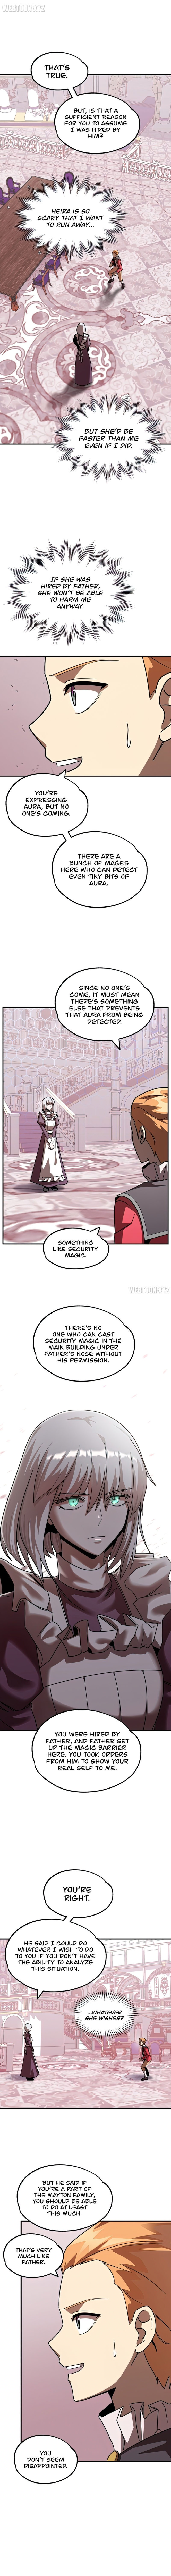 youngest-scion-of-the-mages-chap-22-11